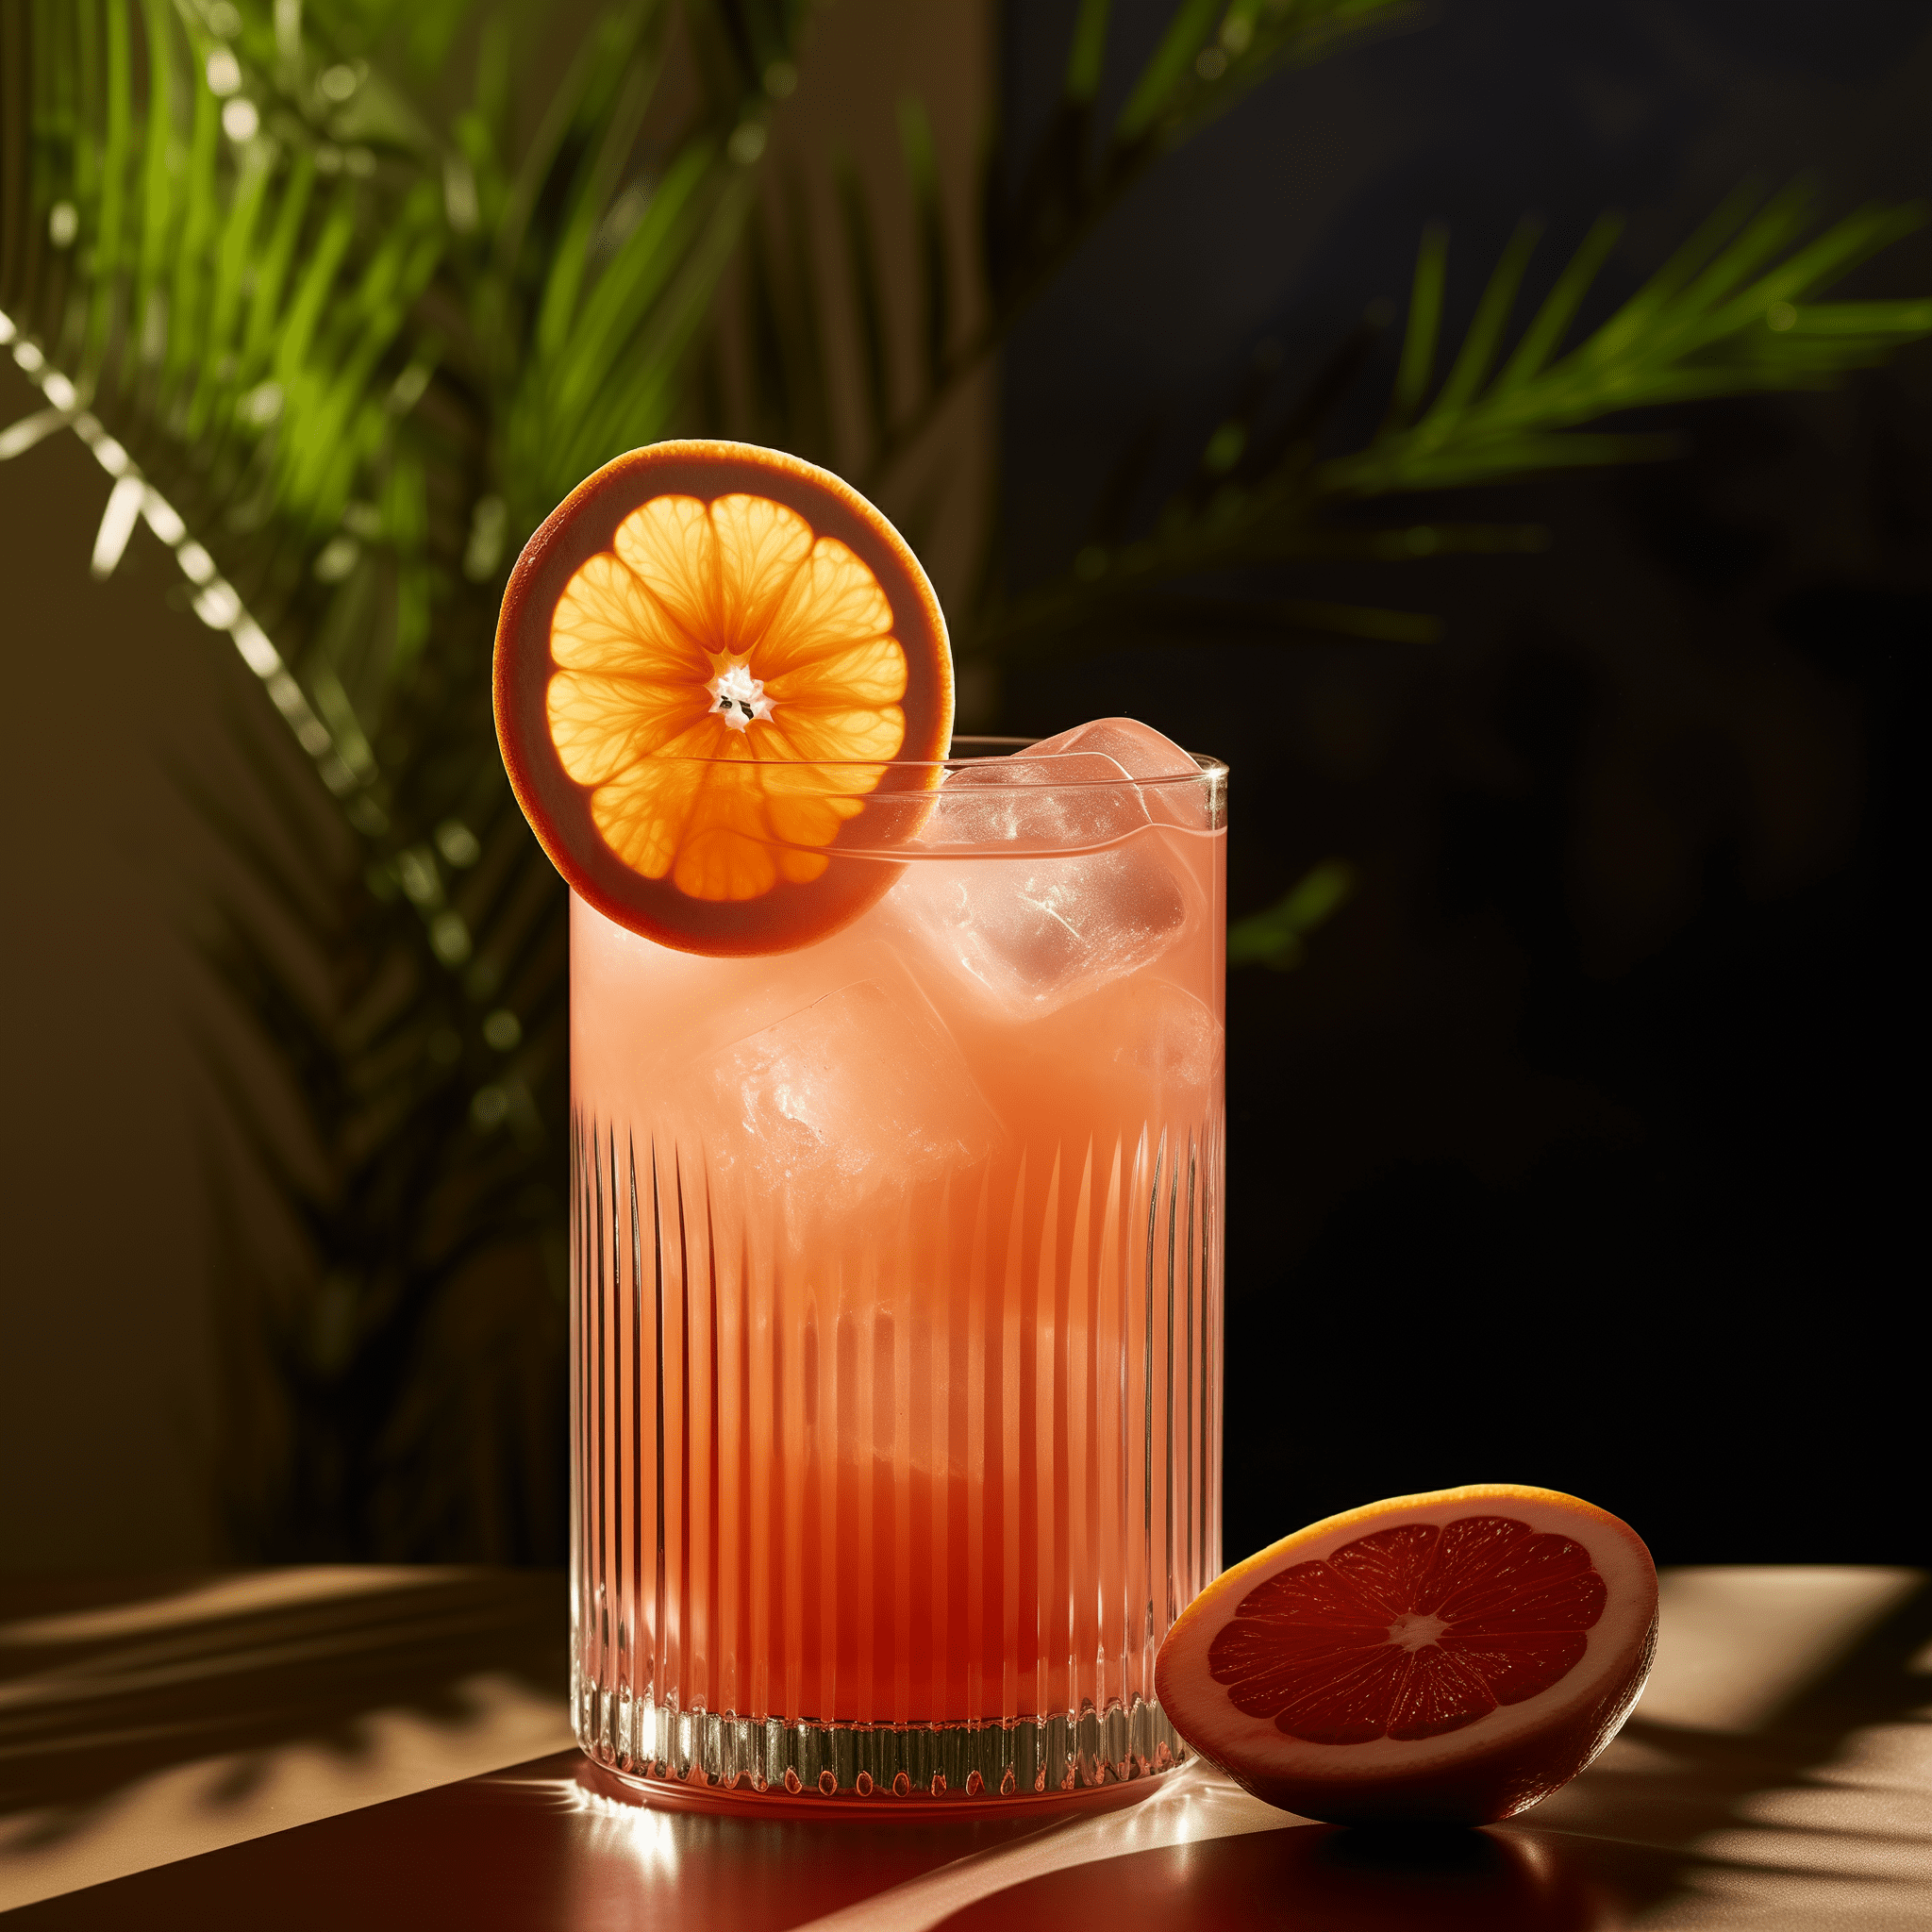 Cyclone Cocktail Recipe - The Cyclone cocktail offers a delightful balance of sweet and sour flavors. The Grand Marnier provides a smooth, rich orange base, while the grapefruit juice adds a tangy twist. The lemonade tops it off with a refreshing fizz, and the citron vodka gives it a sharp, spirited edge.